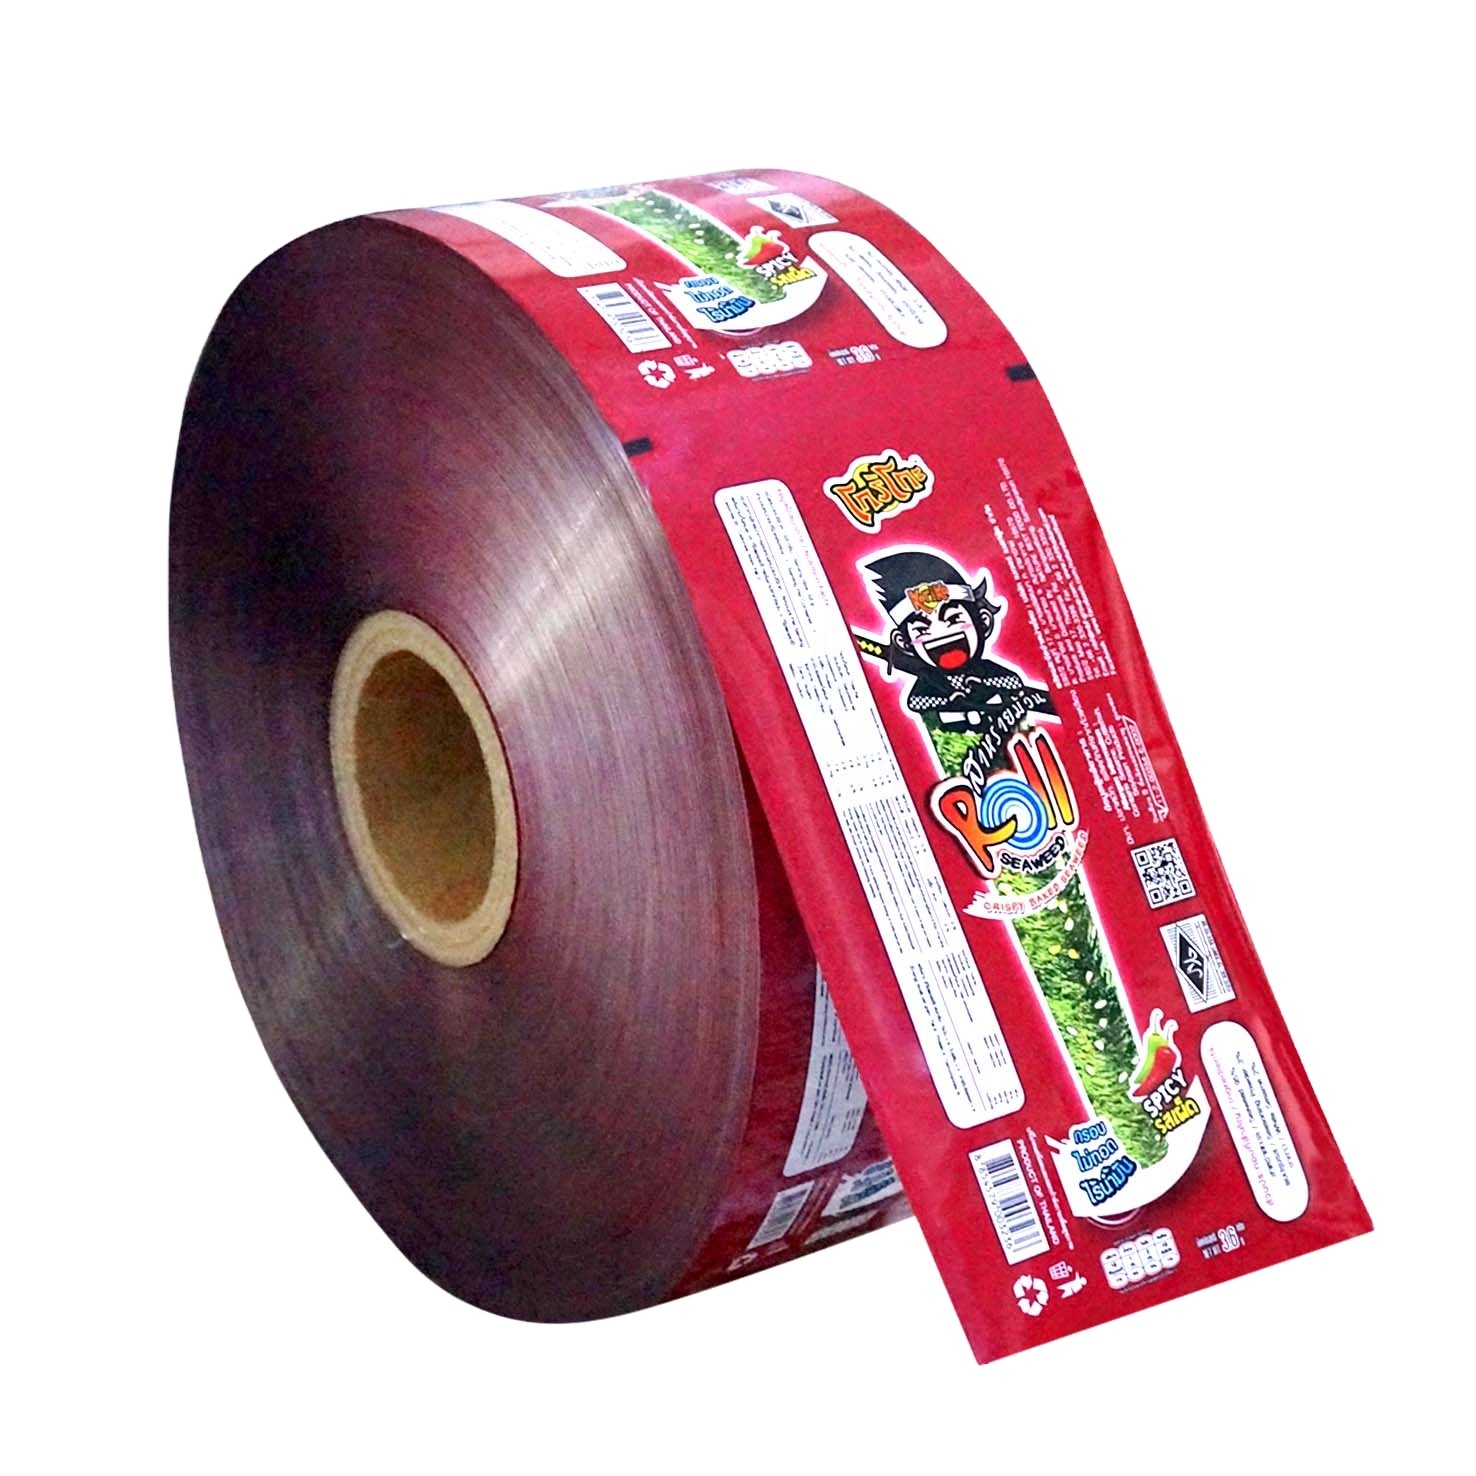 Heat Sealable Laminated Material Sublimation Film Heat Seal Film Heat Resistant Opaque Shrink